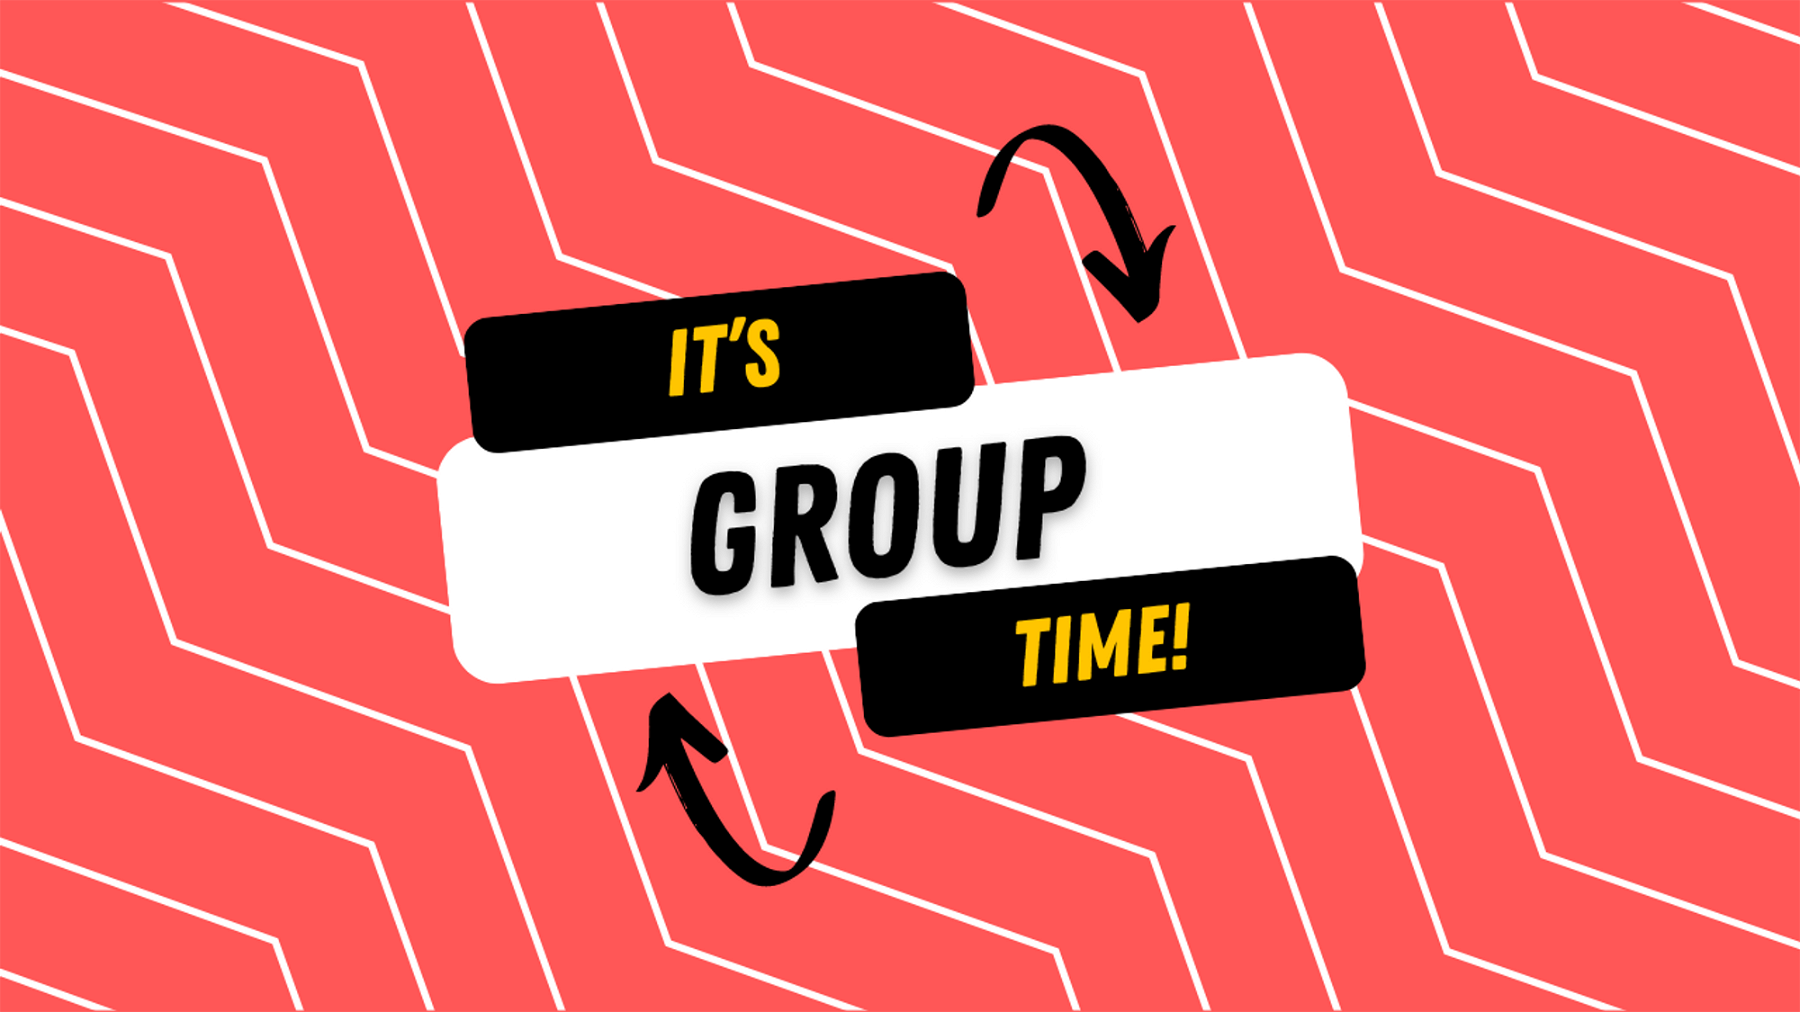 👨‍👩‍👧‍👦 It’s Group Time!